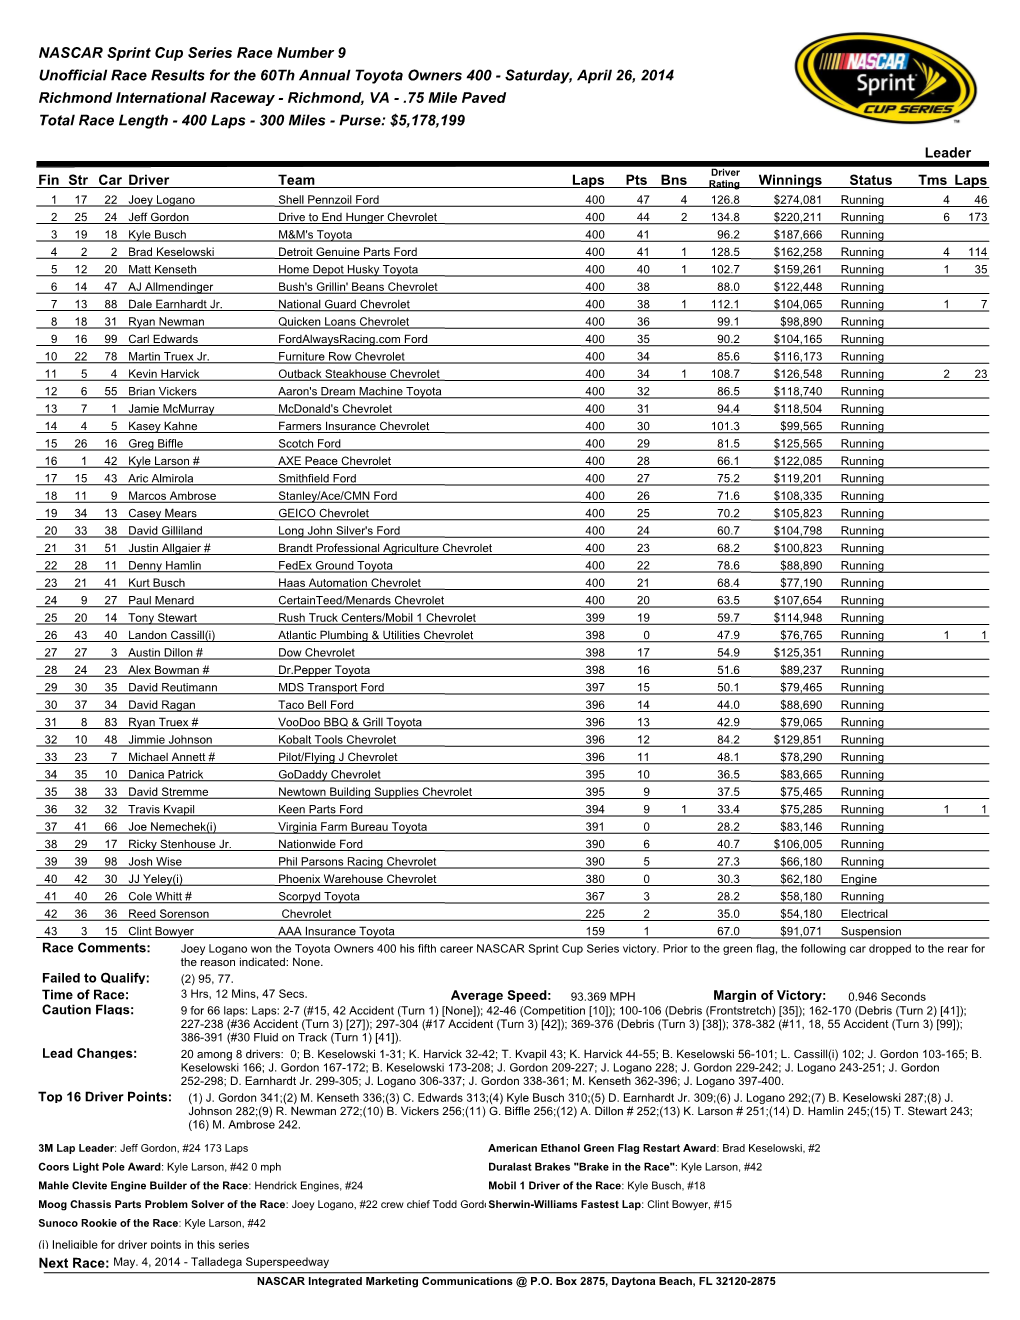 NASCAR Sprint Cup Series Race Number 9 Unofficial Race Results for the 60Th Annual Toyota Owners